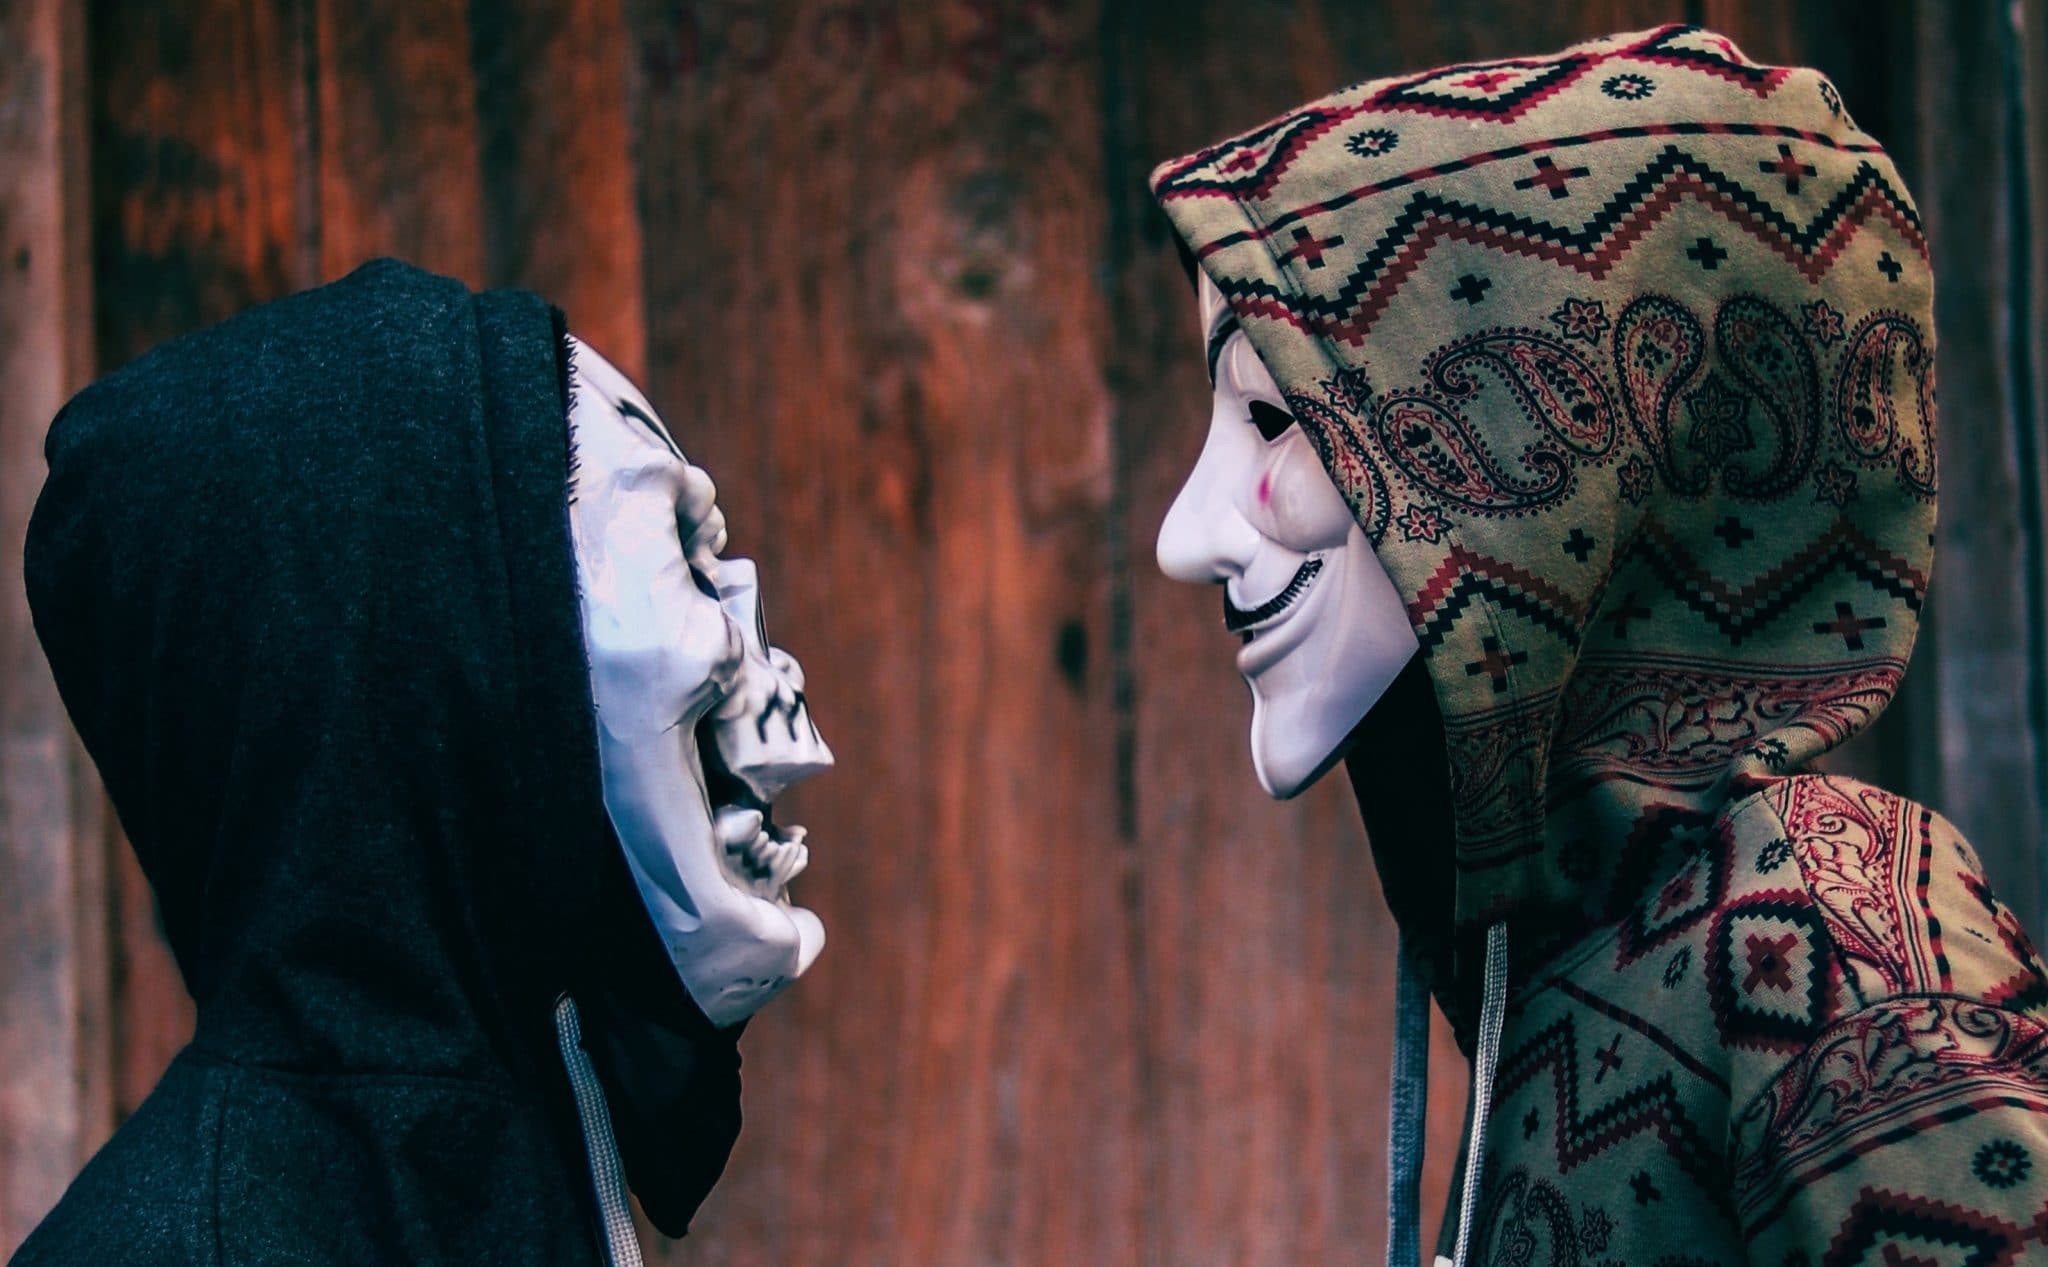 Two people negotiating whilst wearing masks and hoodies